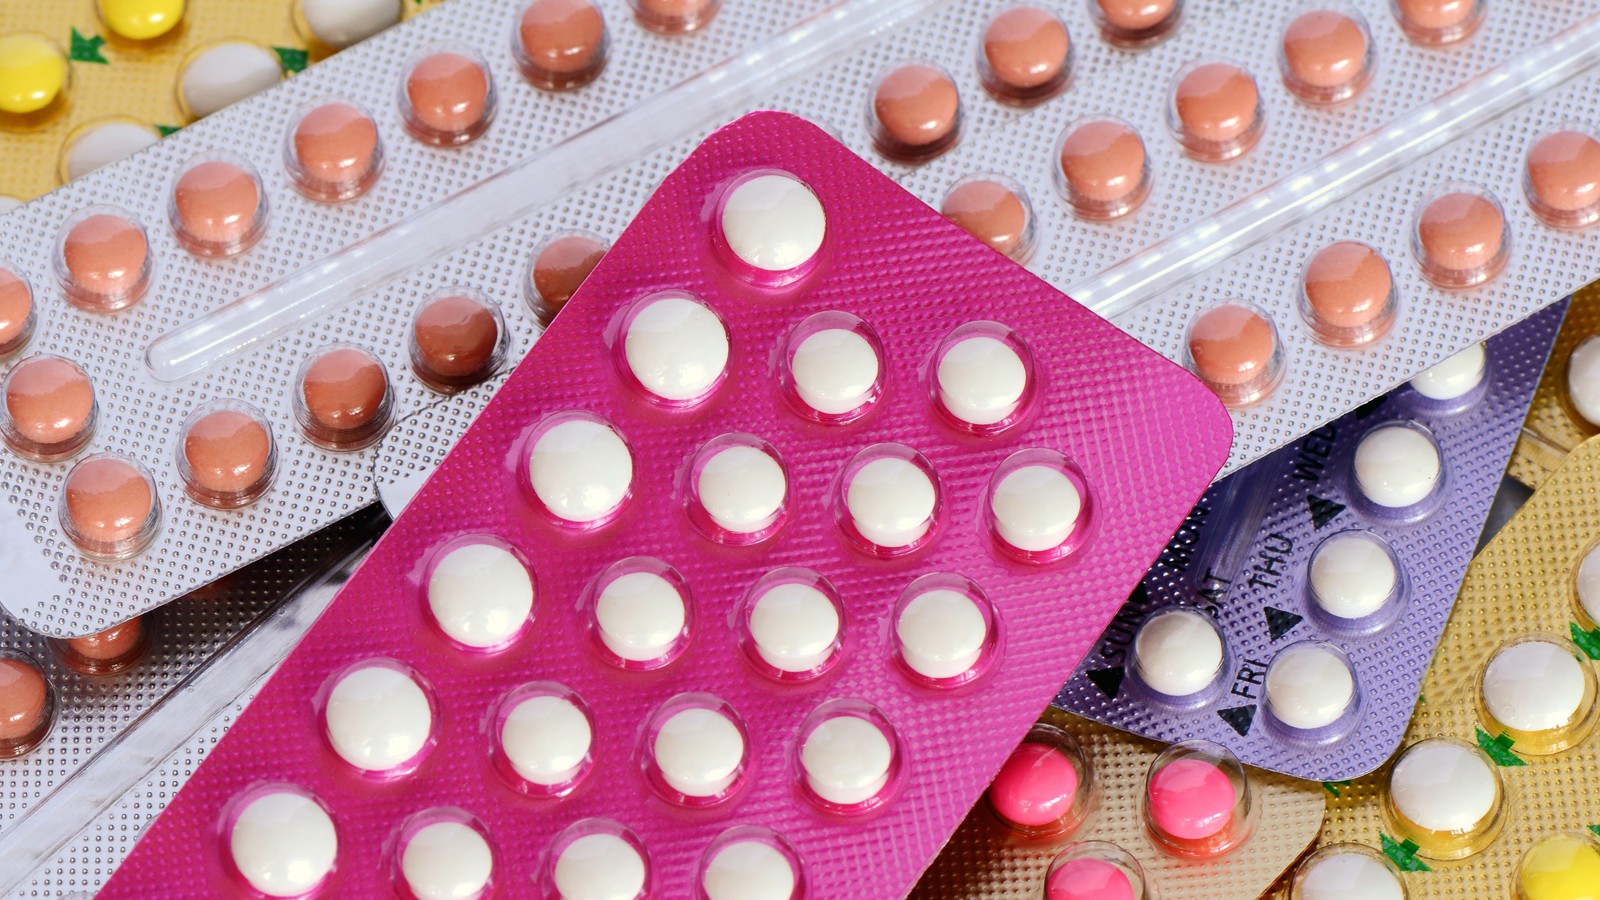 Birth Control—And More—Without a Prescription - The Atlantic